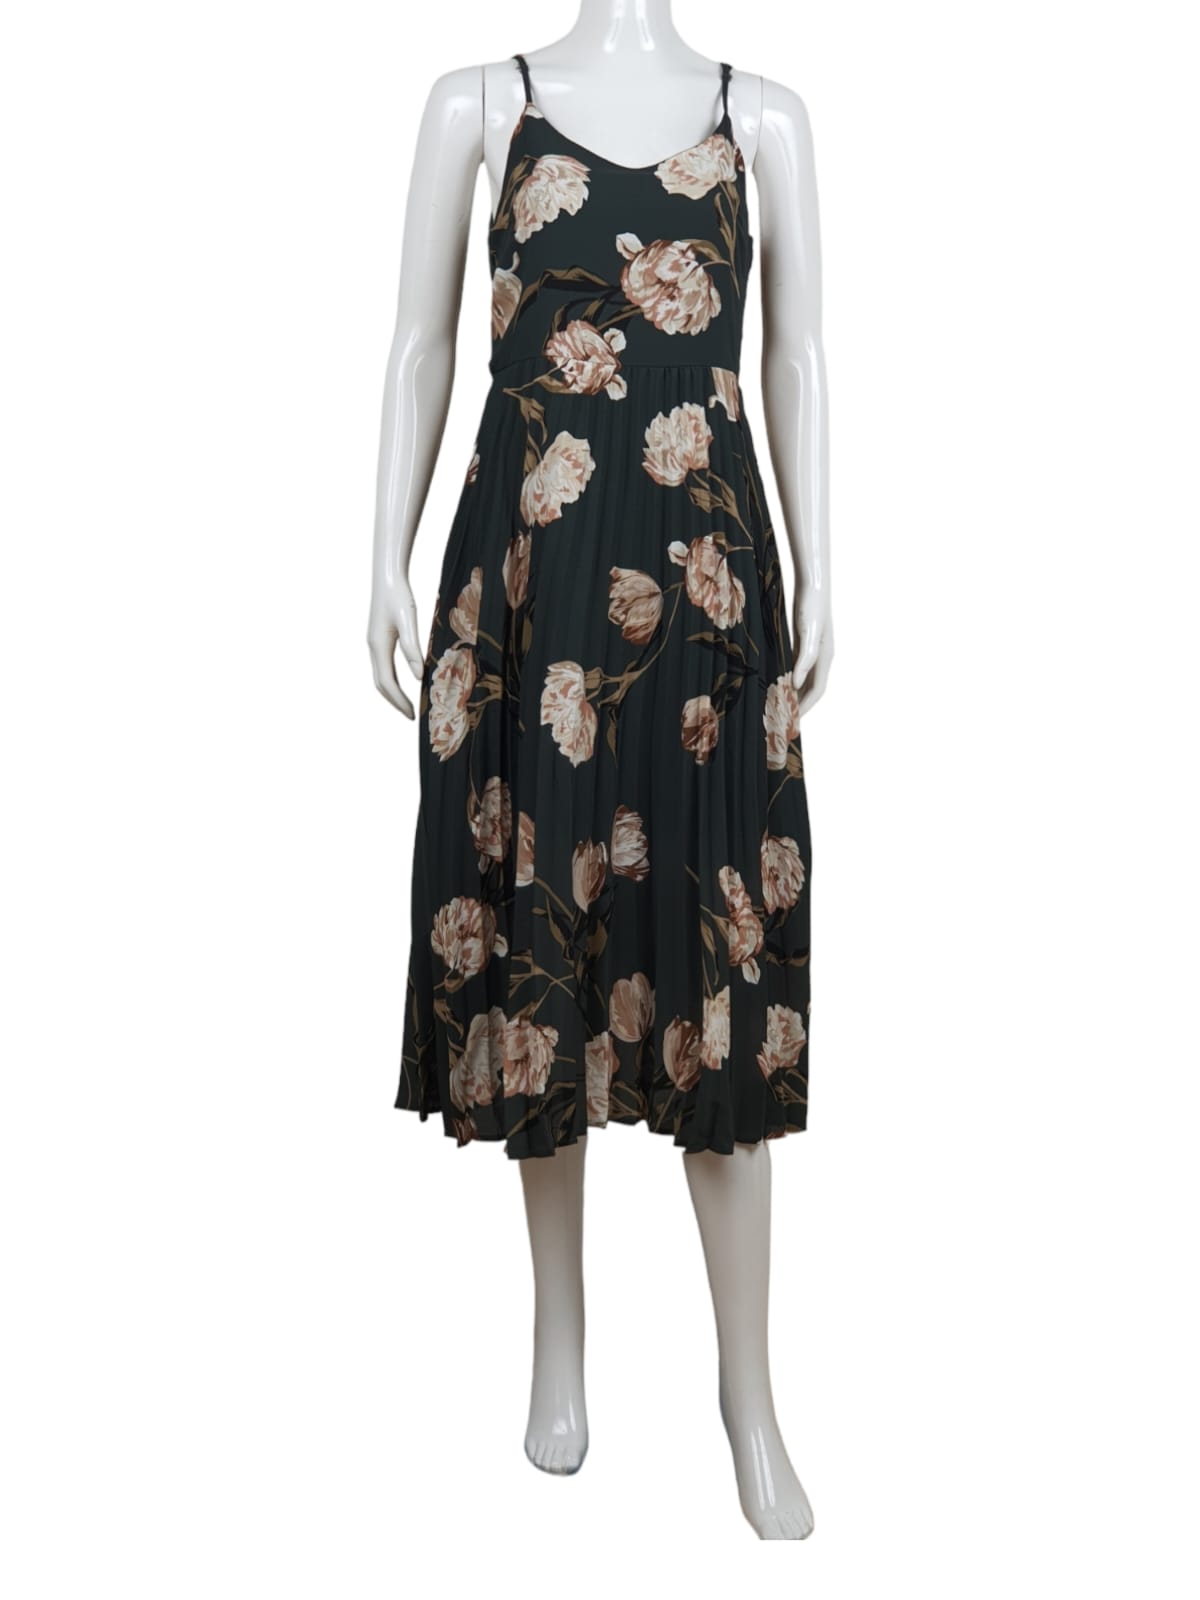 A . New Day Black Floral Pleated Dress (M)